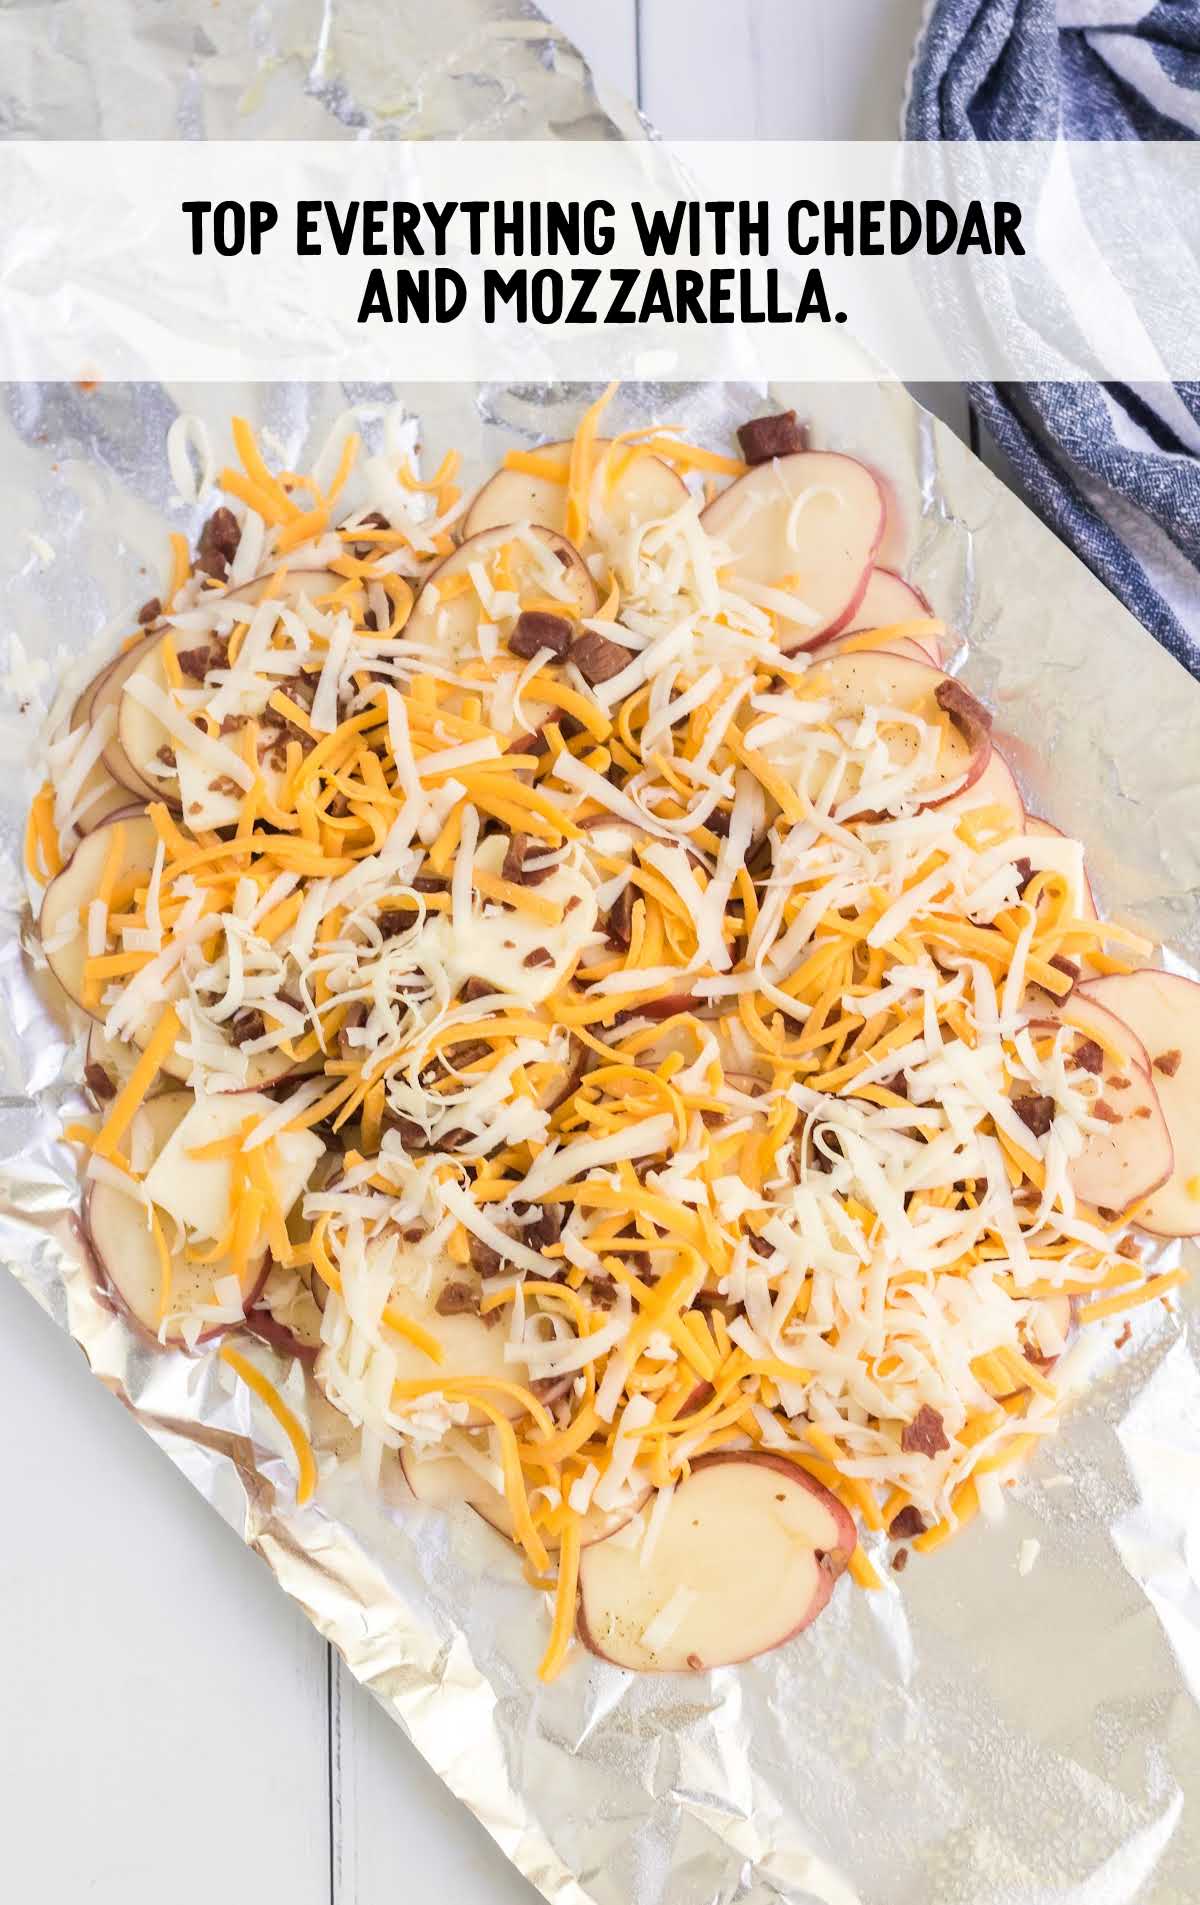 slices of potatoes topped with cheeses